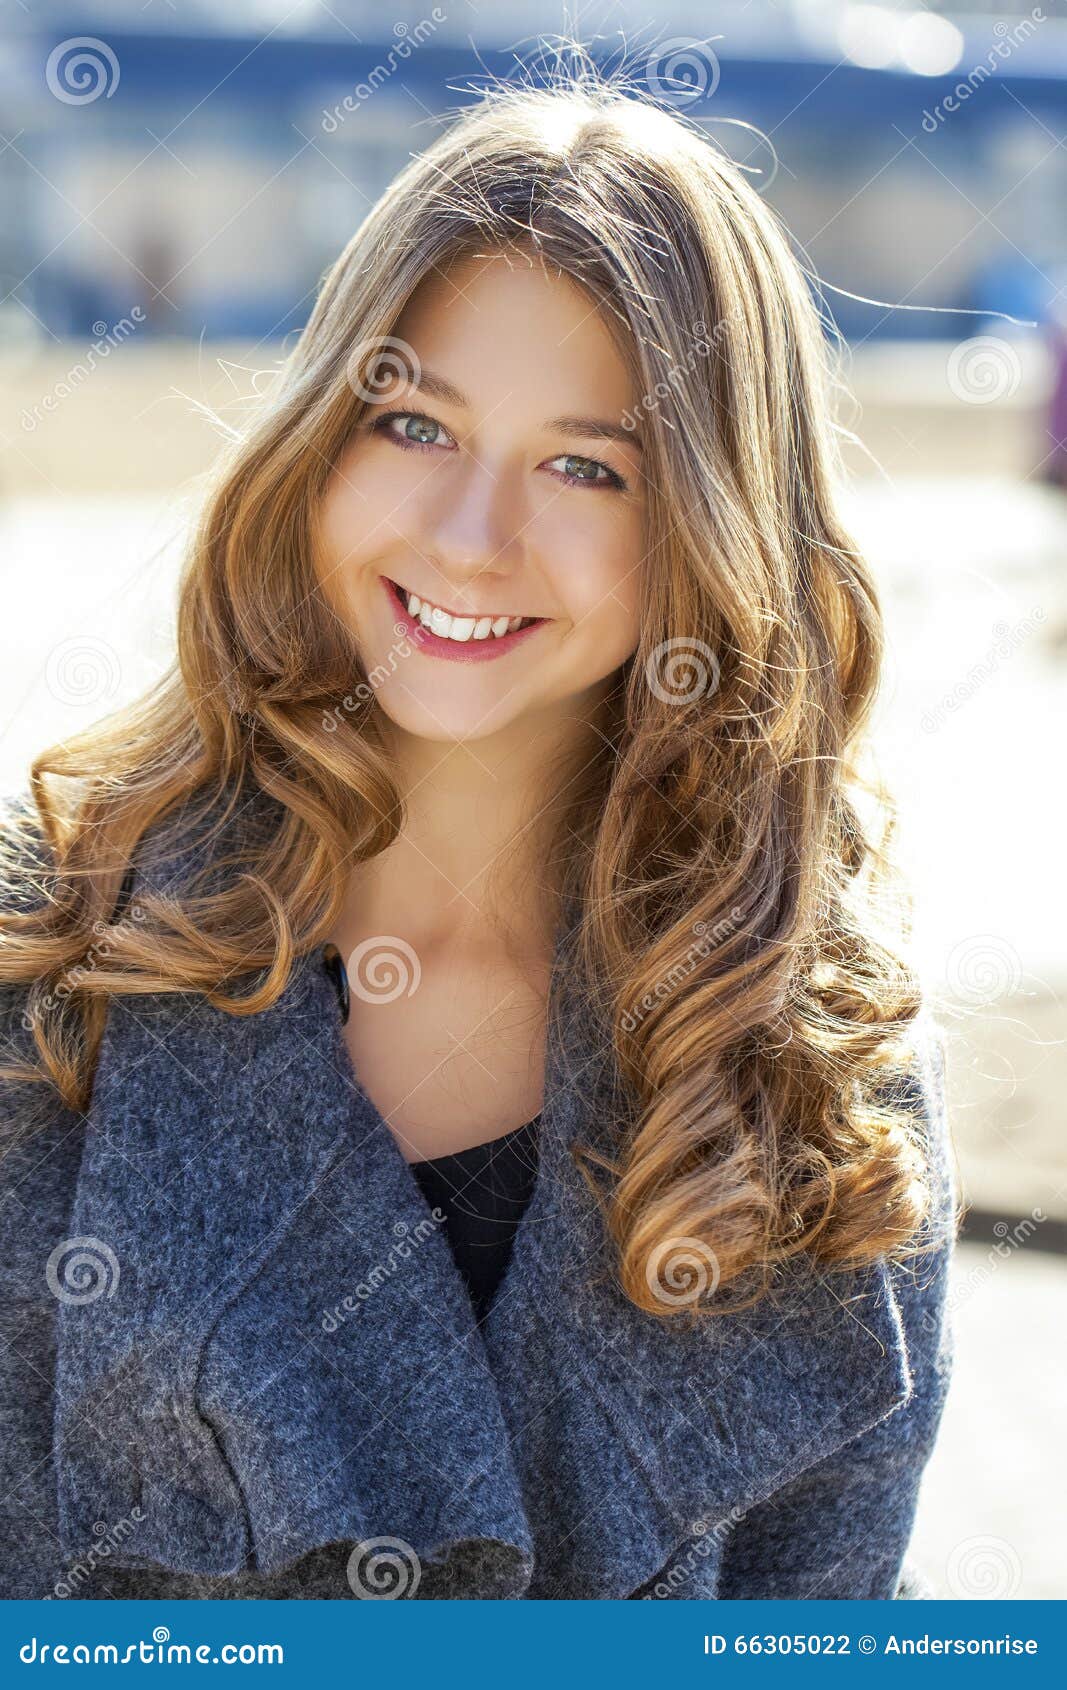 Girl Beautiful | Free Stock Photo | Close-up portrait of a 